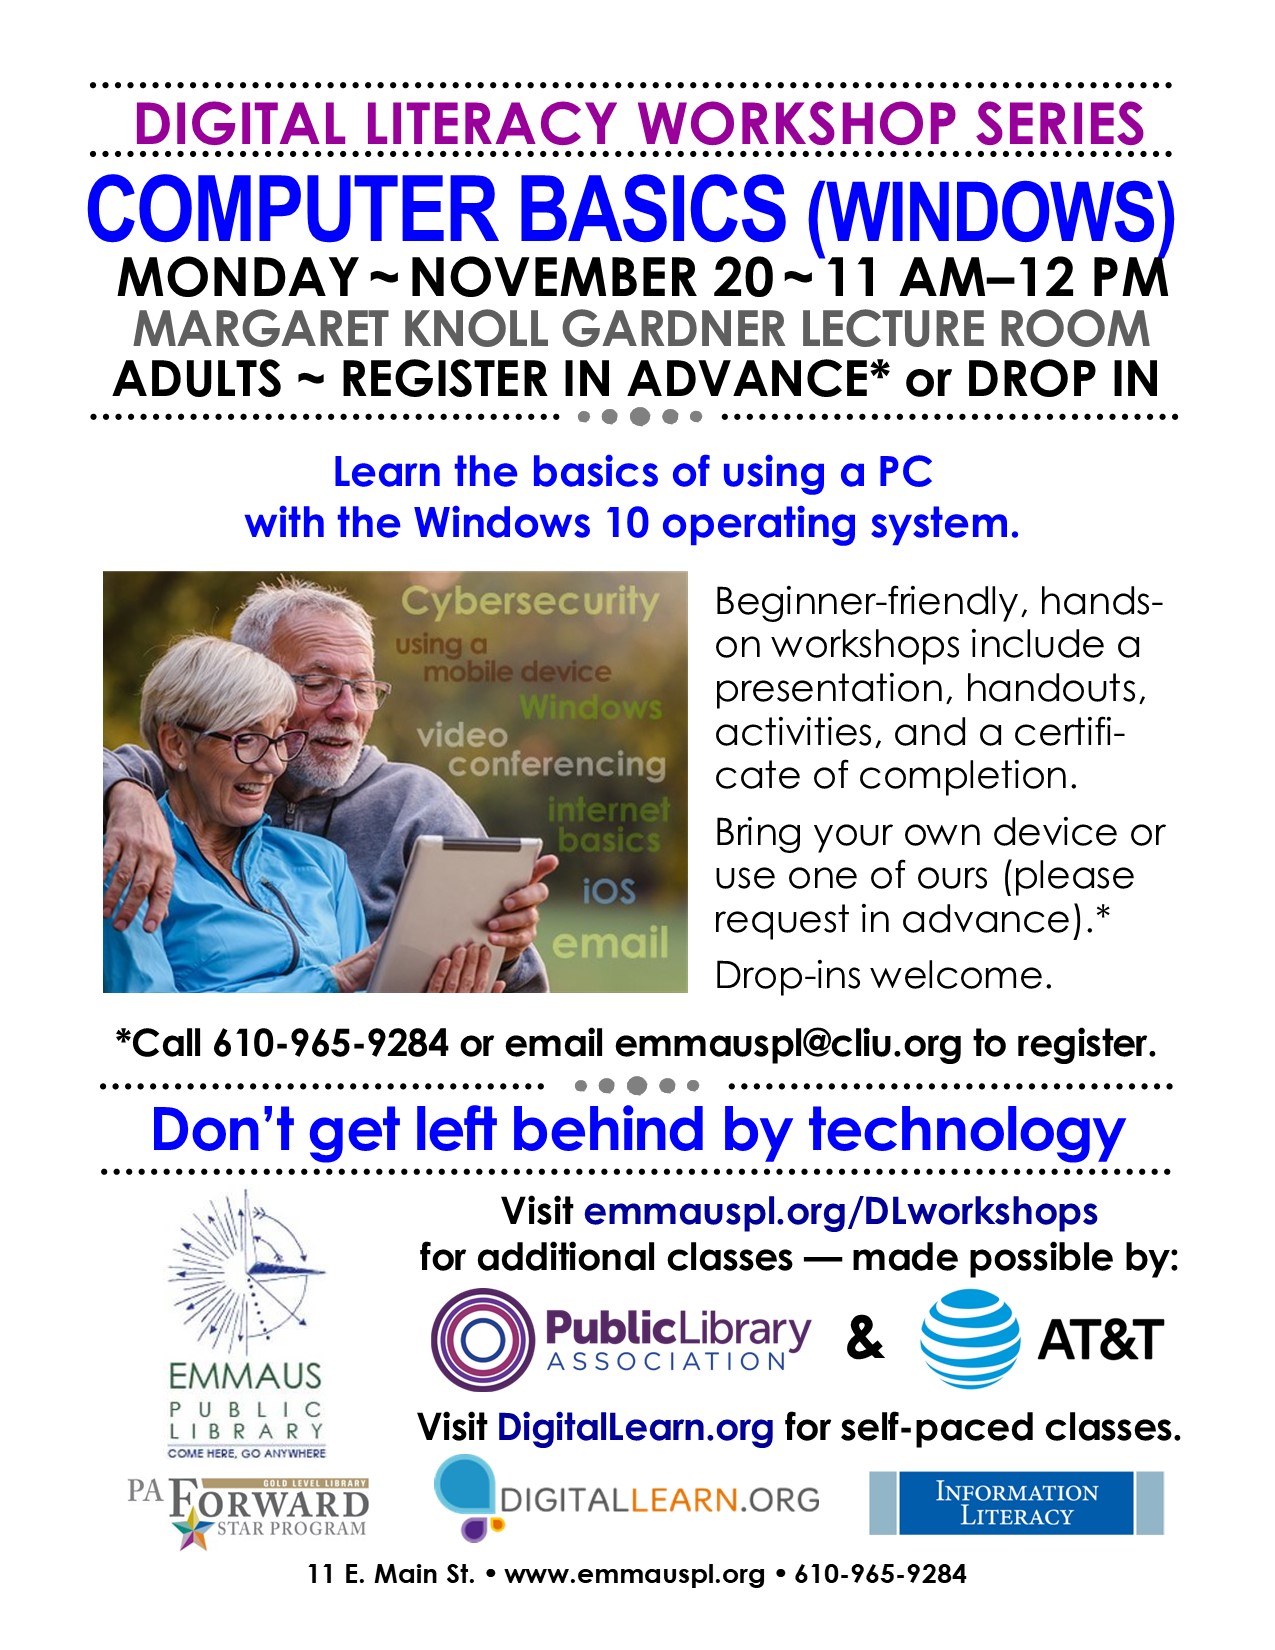 ADULTS: Computer and Cell Phone Usage Workshops